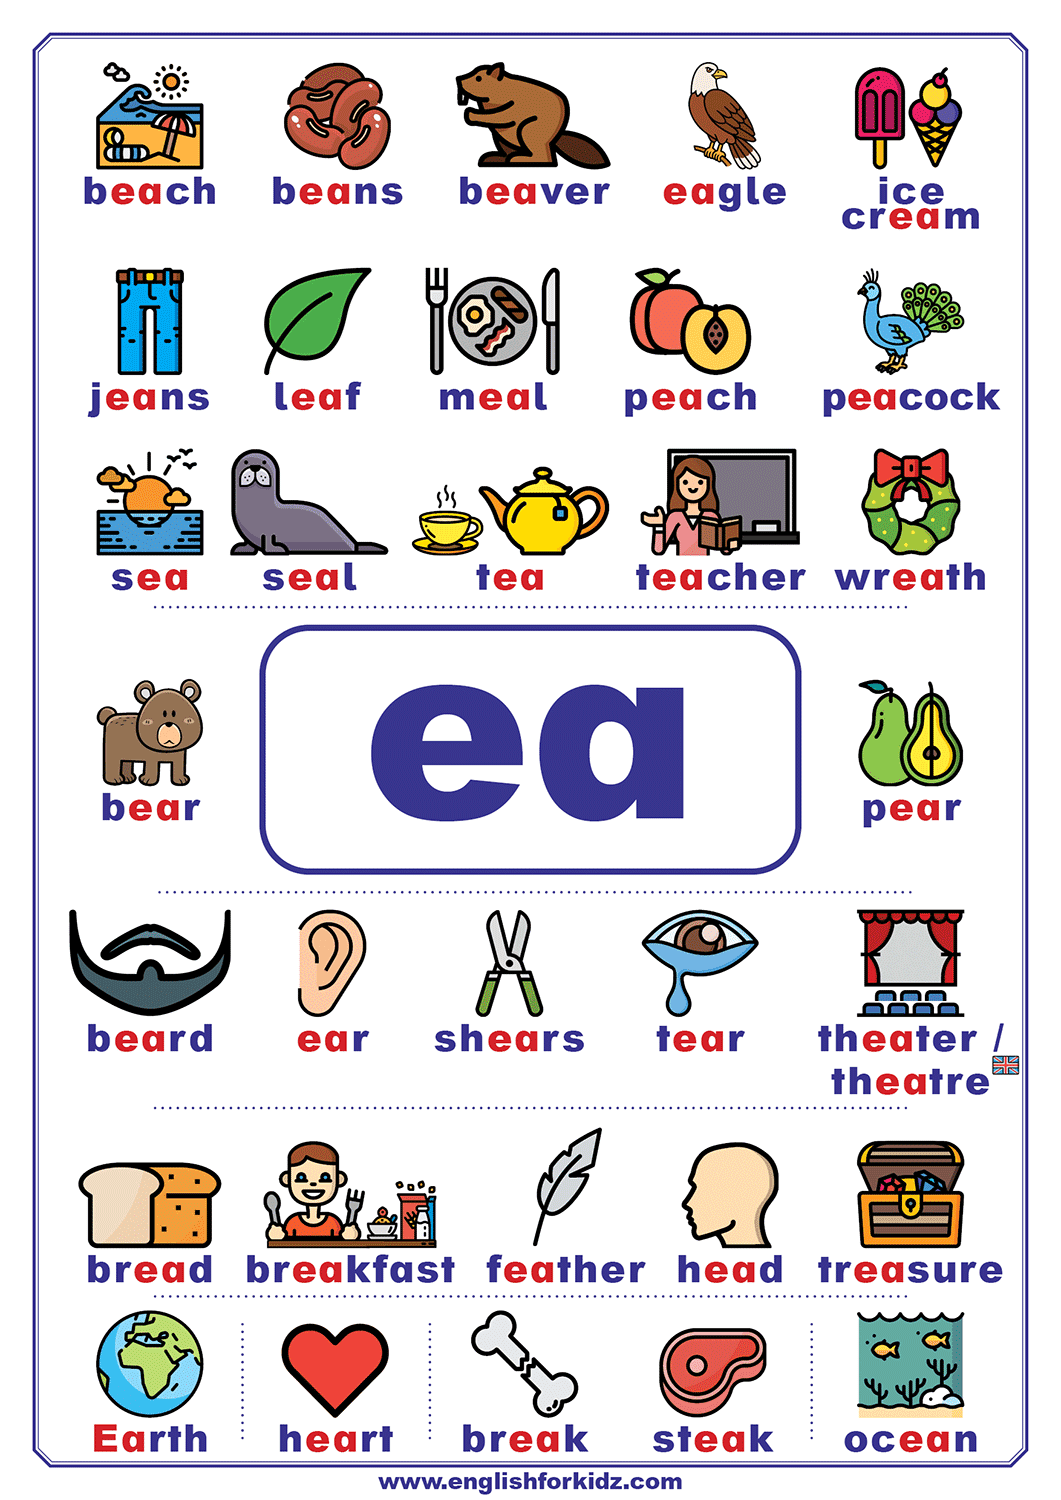 English for Kids Step by Step: Vowel Teams - Printable Posters